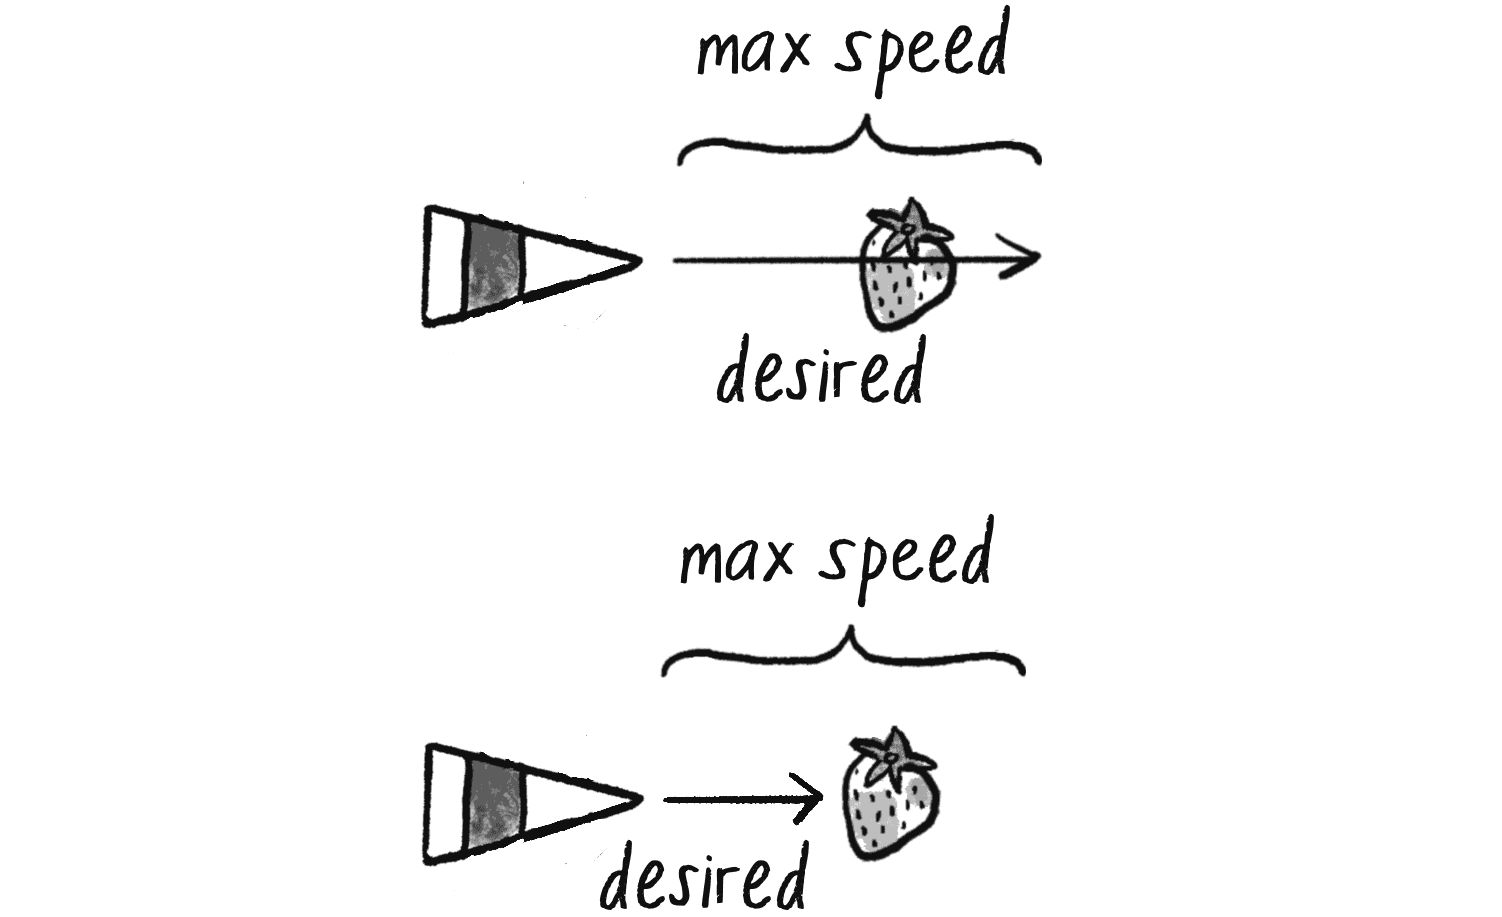 Figure 5.6: The top vehicle has a desired velocity at maximum speed and will overshoot the target. The bottom vehicle illustrates scaling the desired velocity according to the distance from the target. (While I encourage you to continue thinking about the vehicle as a cute, bug-like creature, from this point it’s drawn as a triangle to keep things simple.)